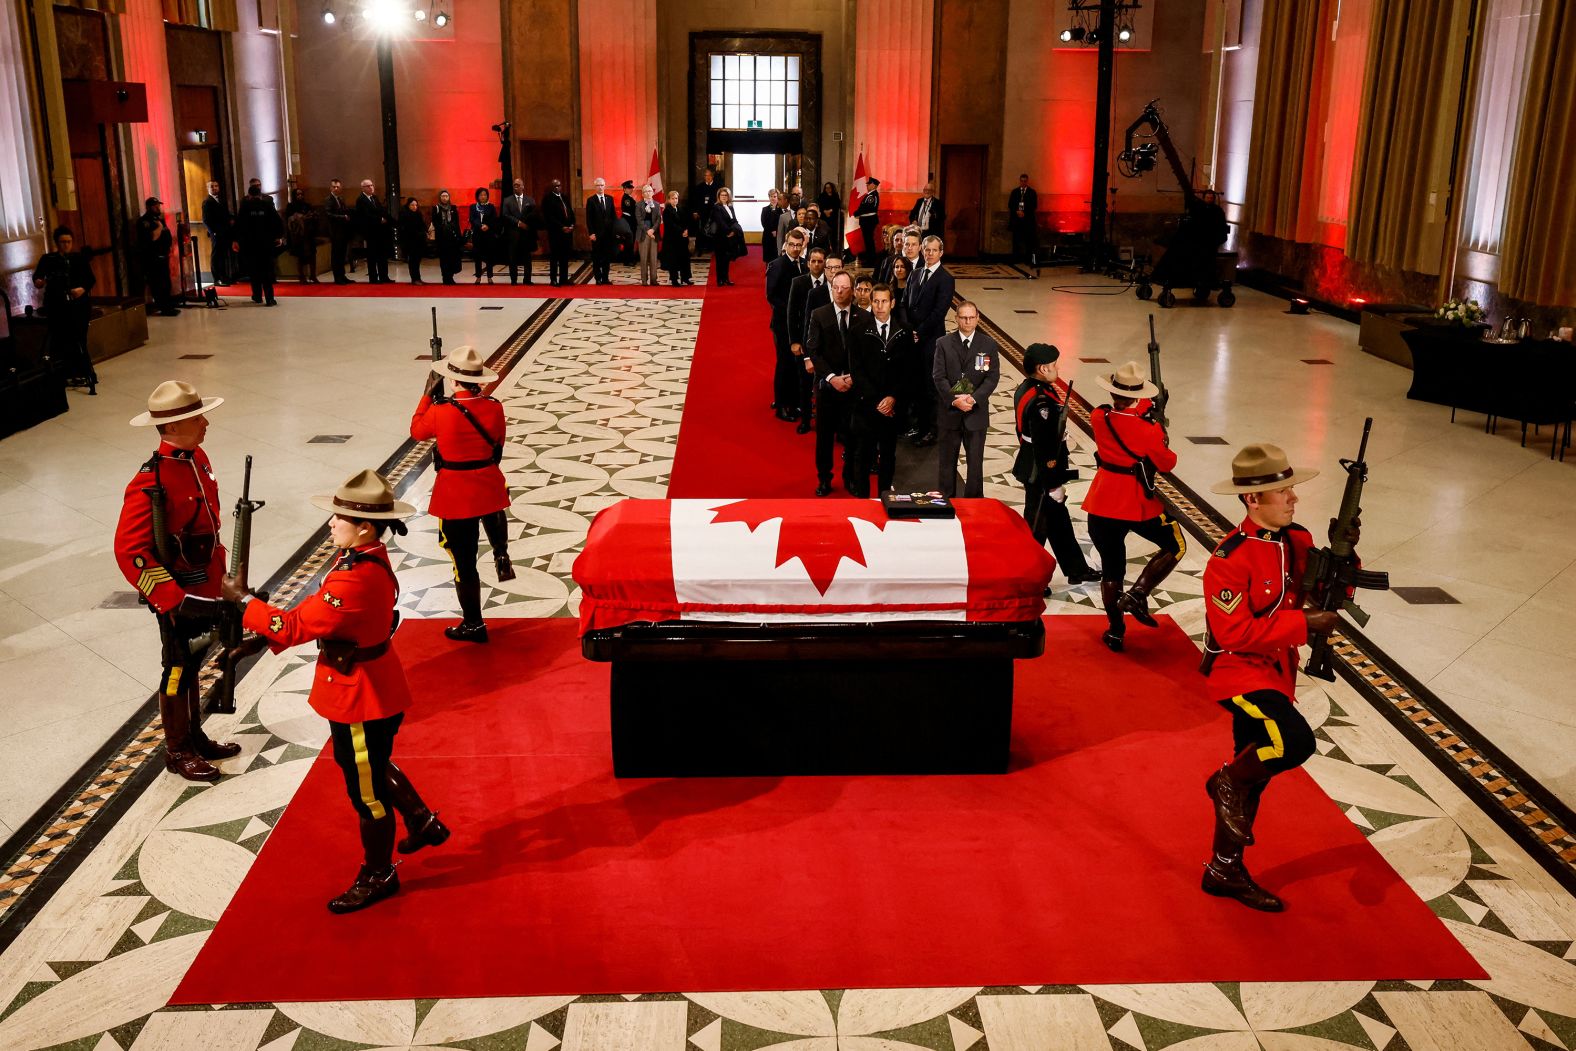 The casket of former Canadian Prime Minister <a href="index.php?page=&url=https%3A%2F%2Fwww.cnn.com%2F2024%2F02%2F29%2Famericas%2Fbrian-mulroney-obit%2Findex.html" target="_blank">Brian Mulroney</a> lies in state ahead of his funeral in Ottawa, Ontario, Canada, on Tuesday, March 19. Mulroney served as Canada's prime minister from 1984 through 1993.